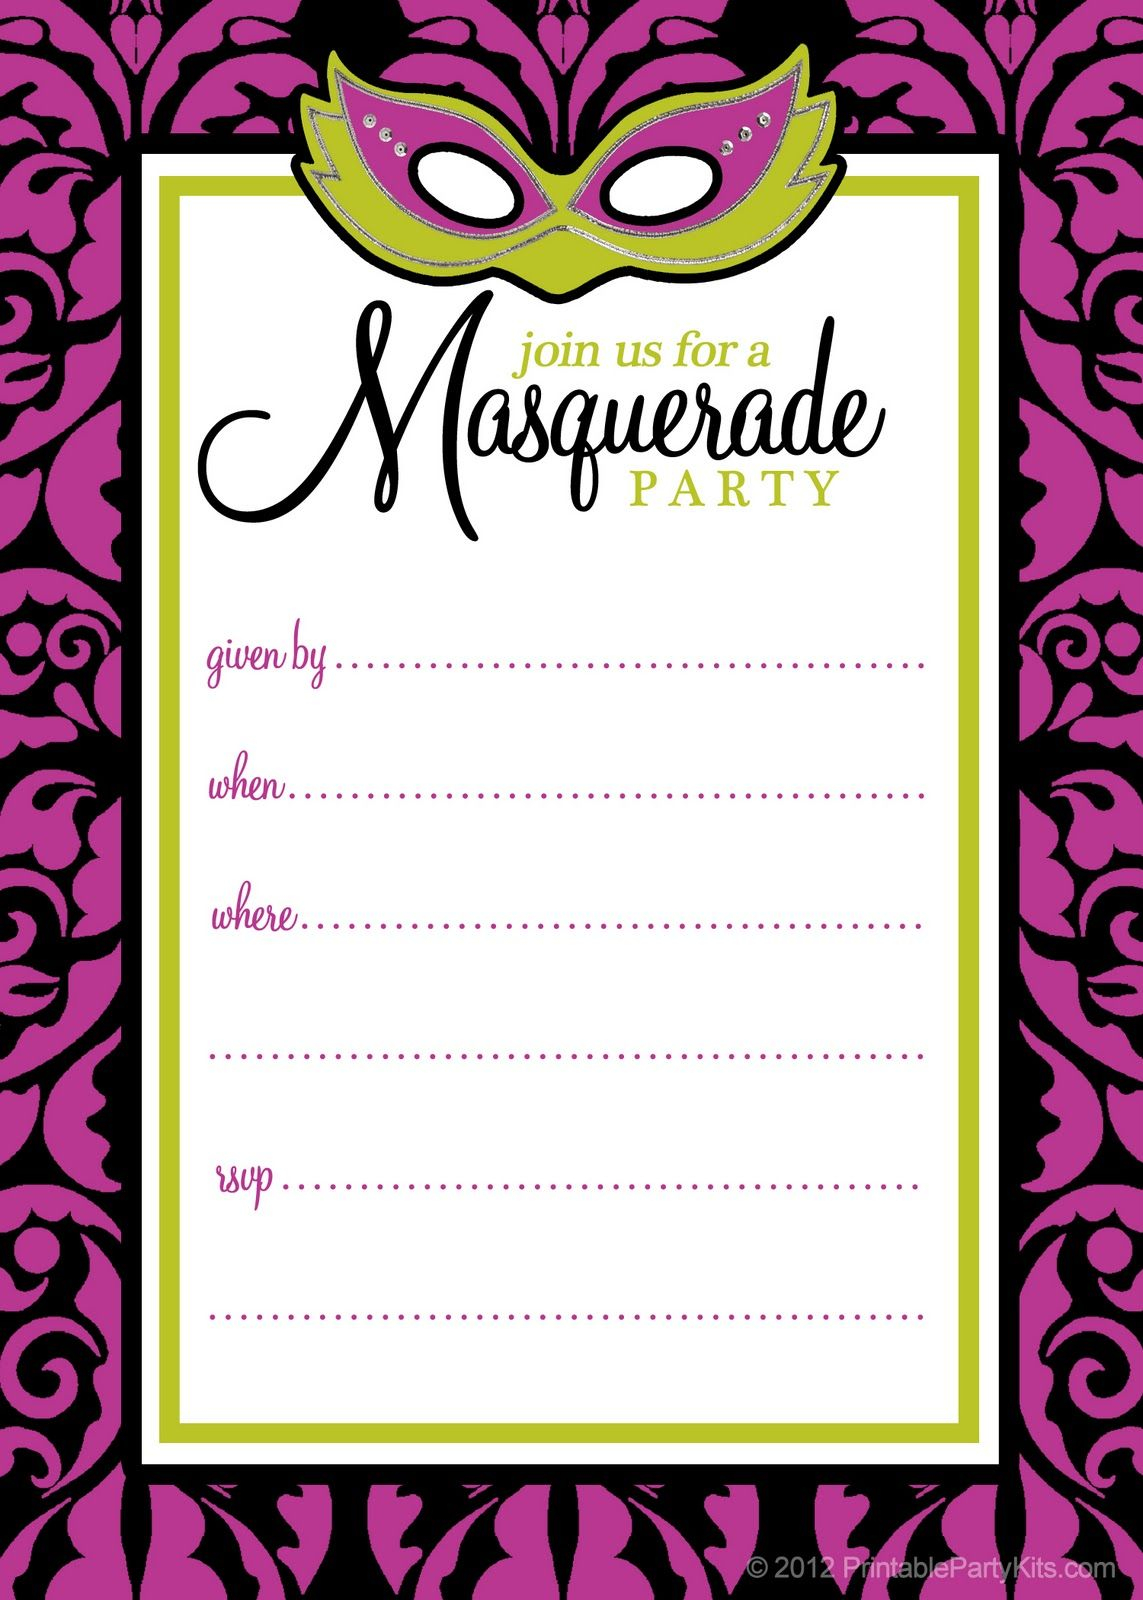 Free Printable Party Invitations Masquerade Or Mardi Gras Party throughout proportions 1143 X 1600